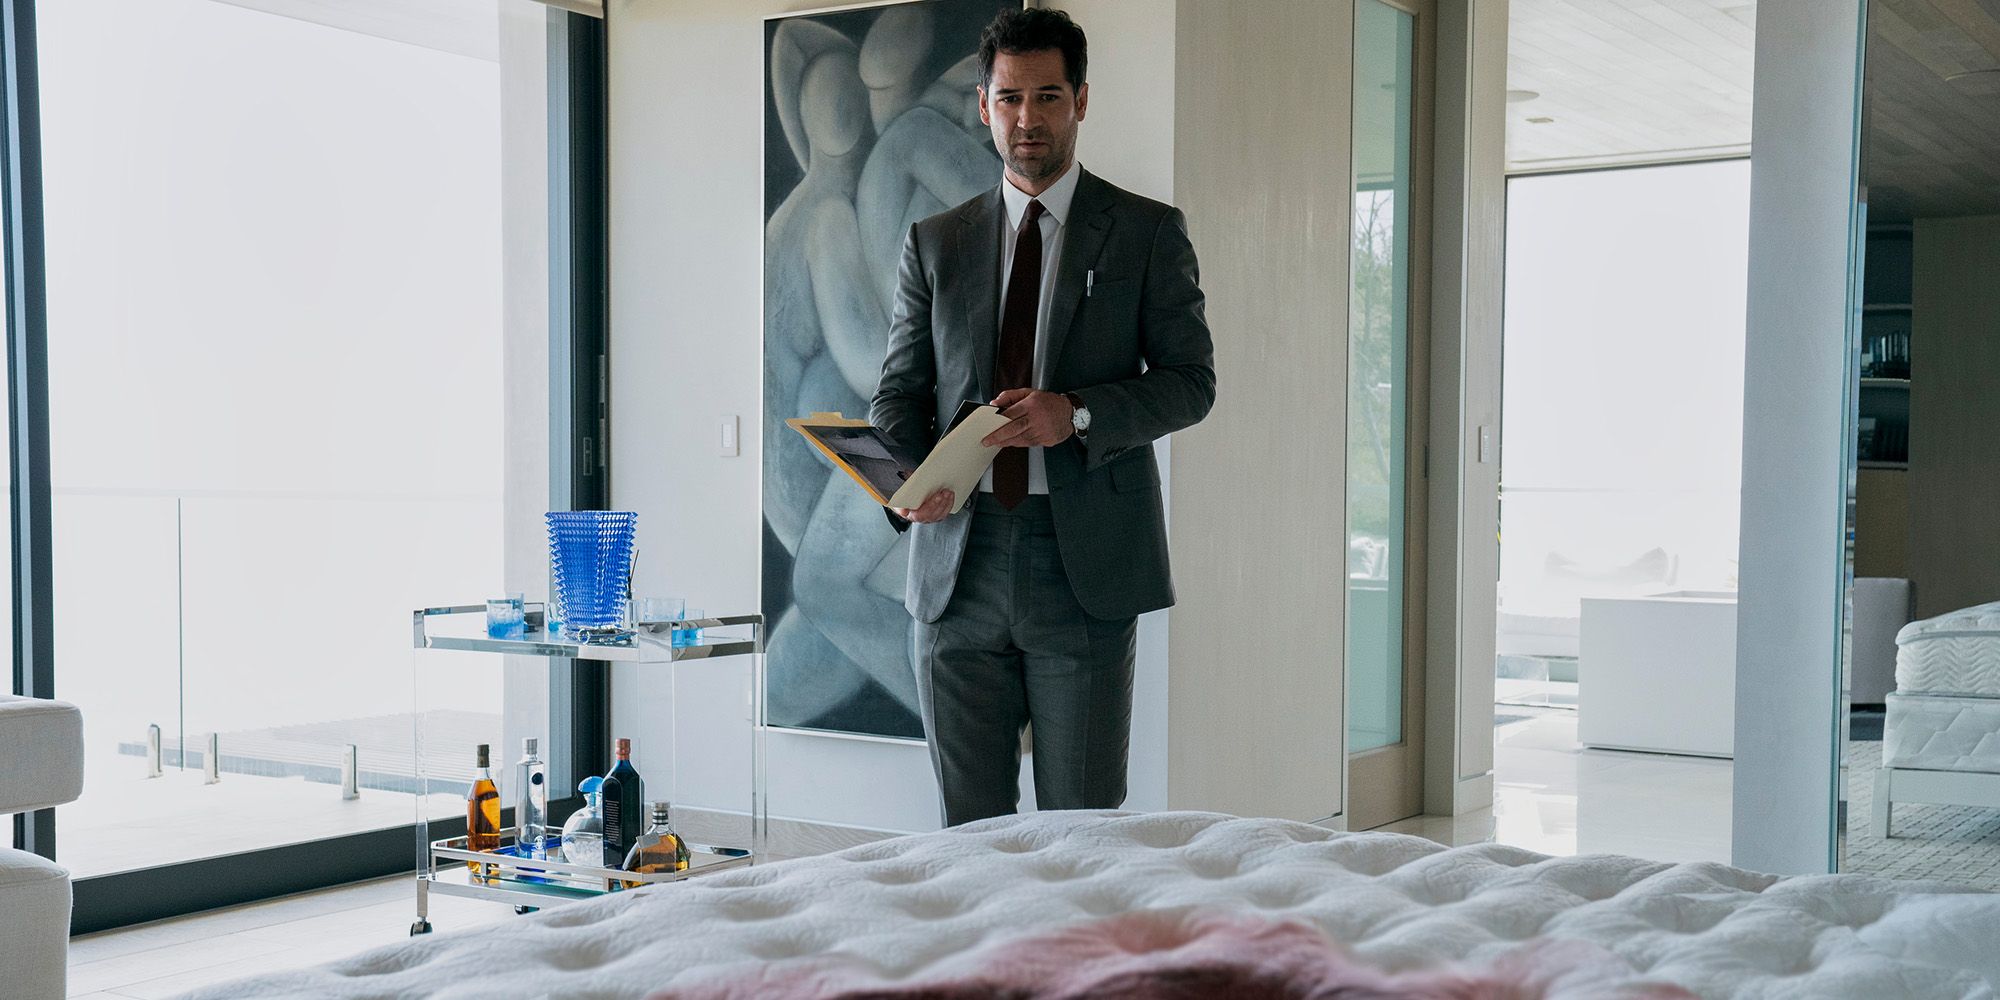 The Lincoln Lawyer Season1 Episode 2 Manuel Garcia Rulfo as Mickey Haller looking at blood stained bed featured